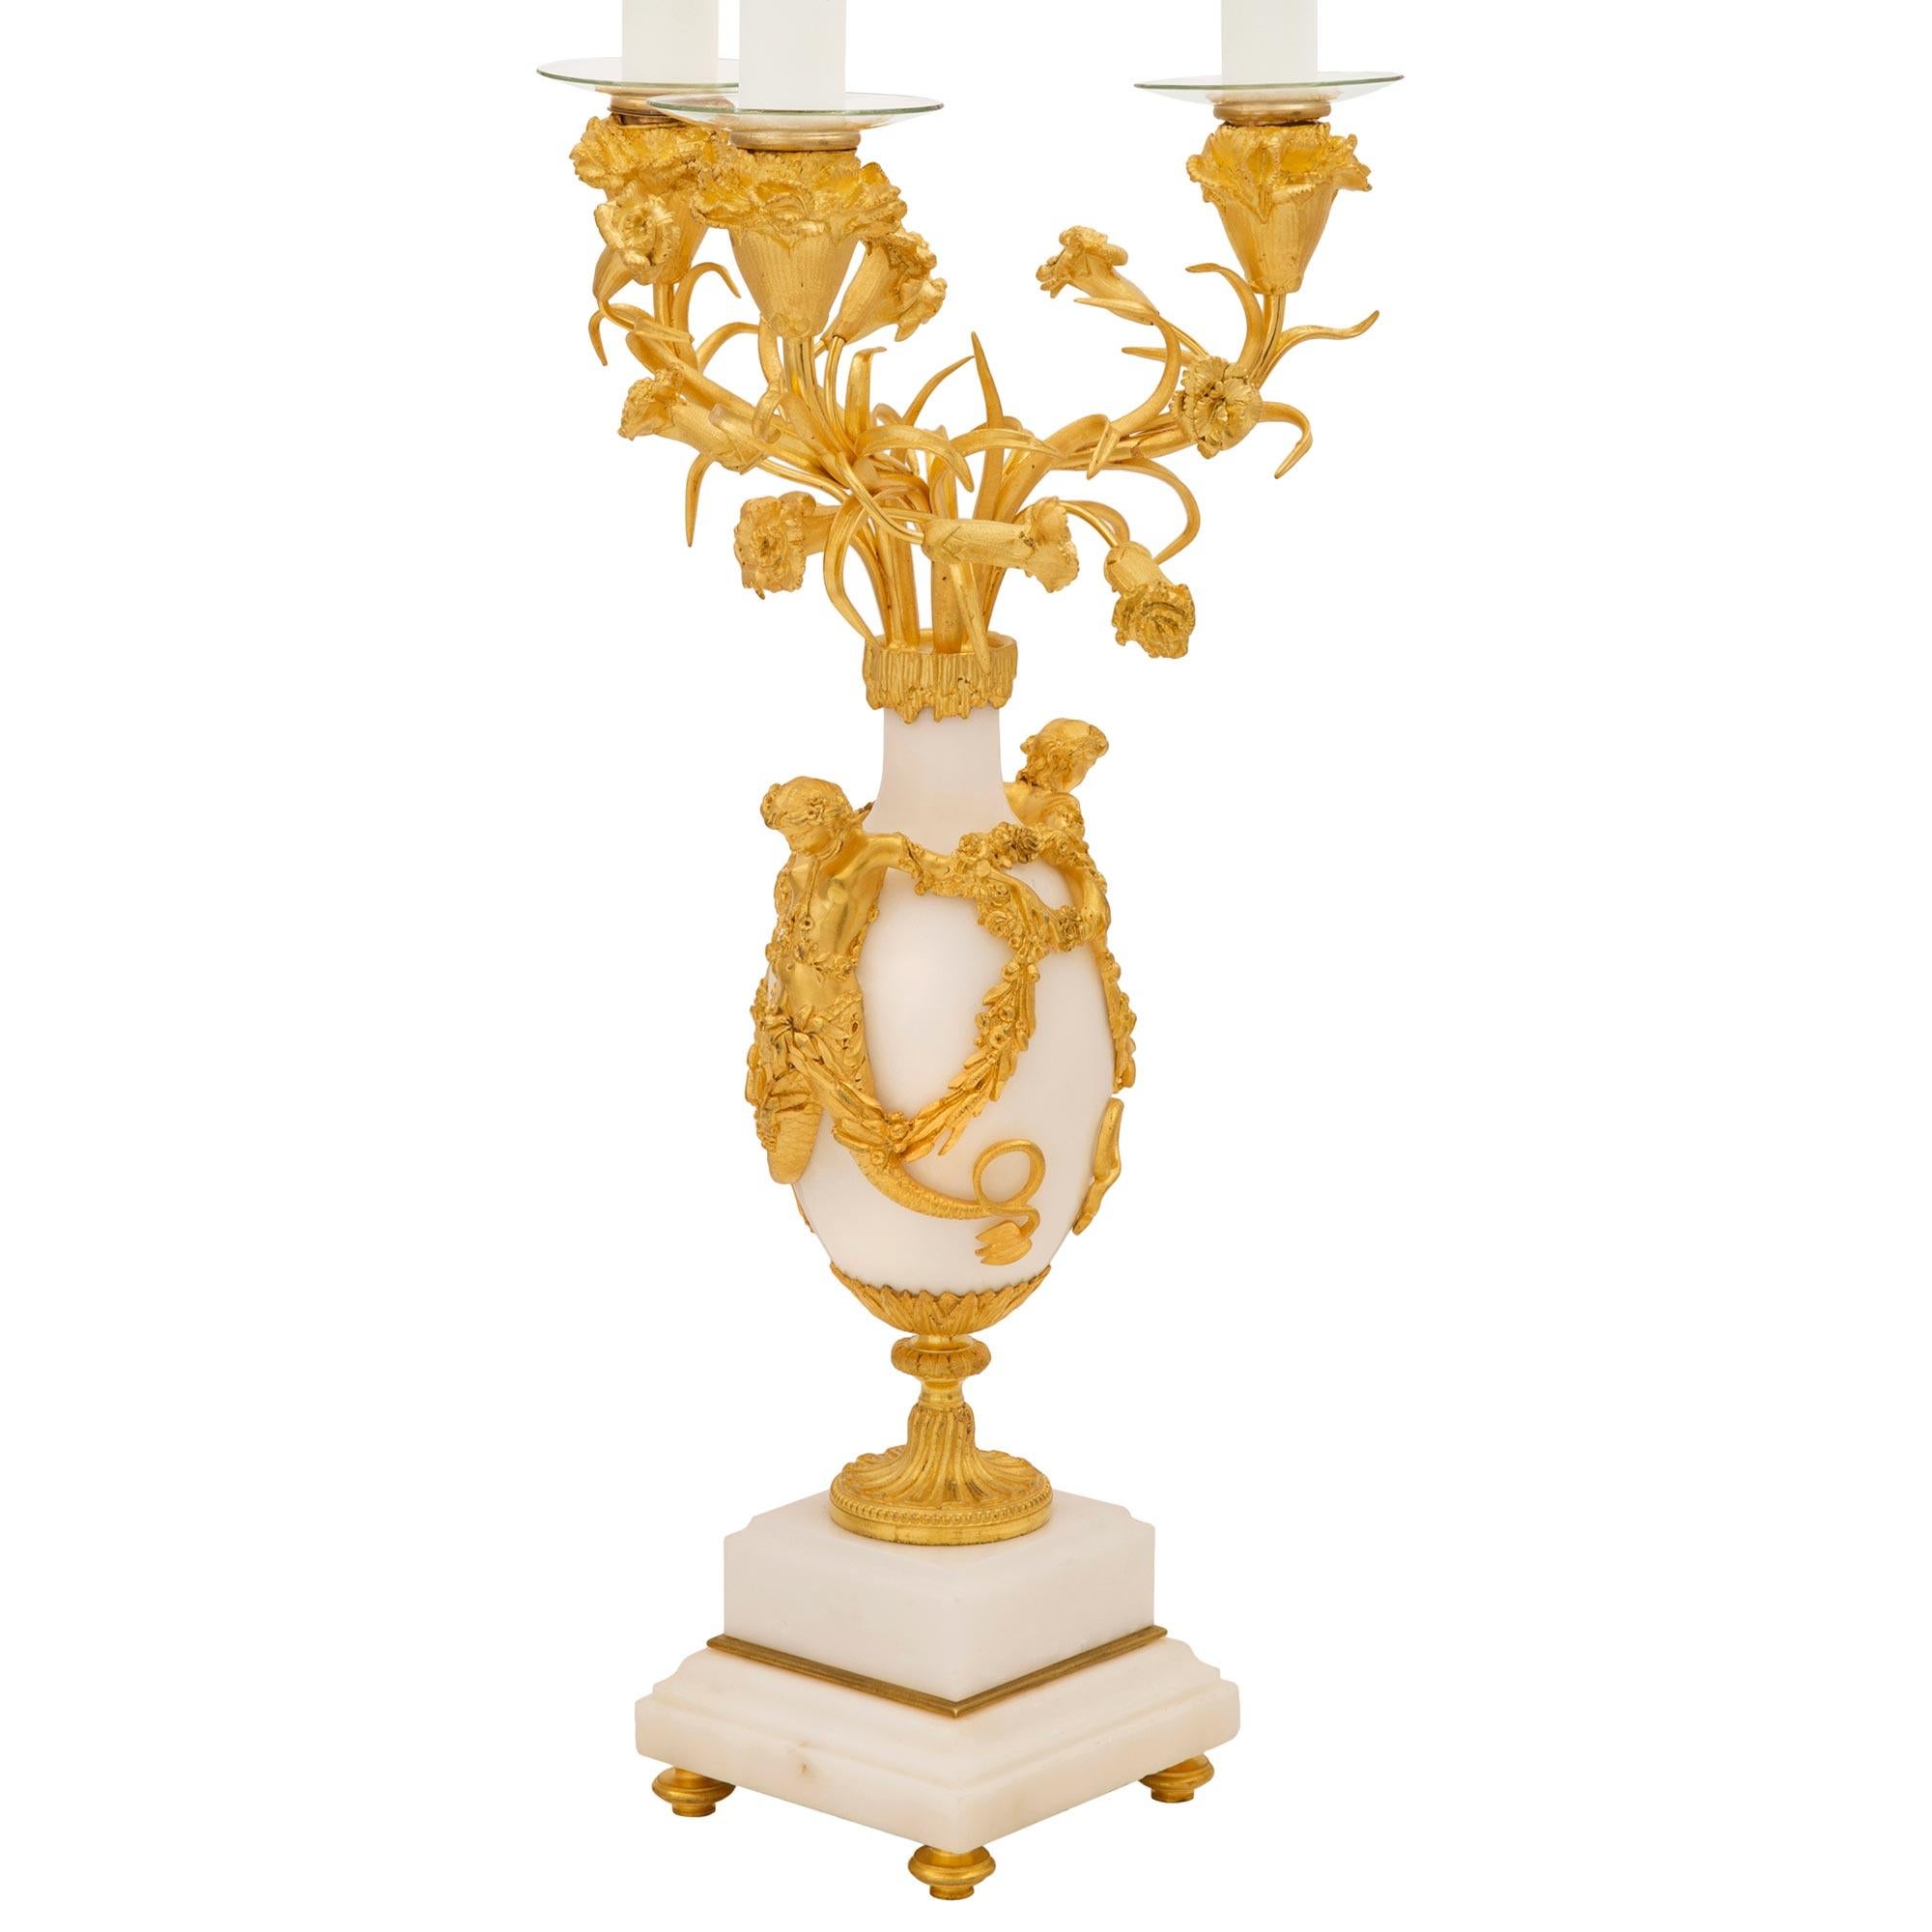 An exceptional pair of French 19th century Louis XVI st. Belle Époque period ormolu and white Carrara marble candelabra lamps. Each three arm lamp is raised by a square white Carrara marble base with an elegant stepped mottled design and fine topie